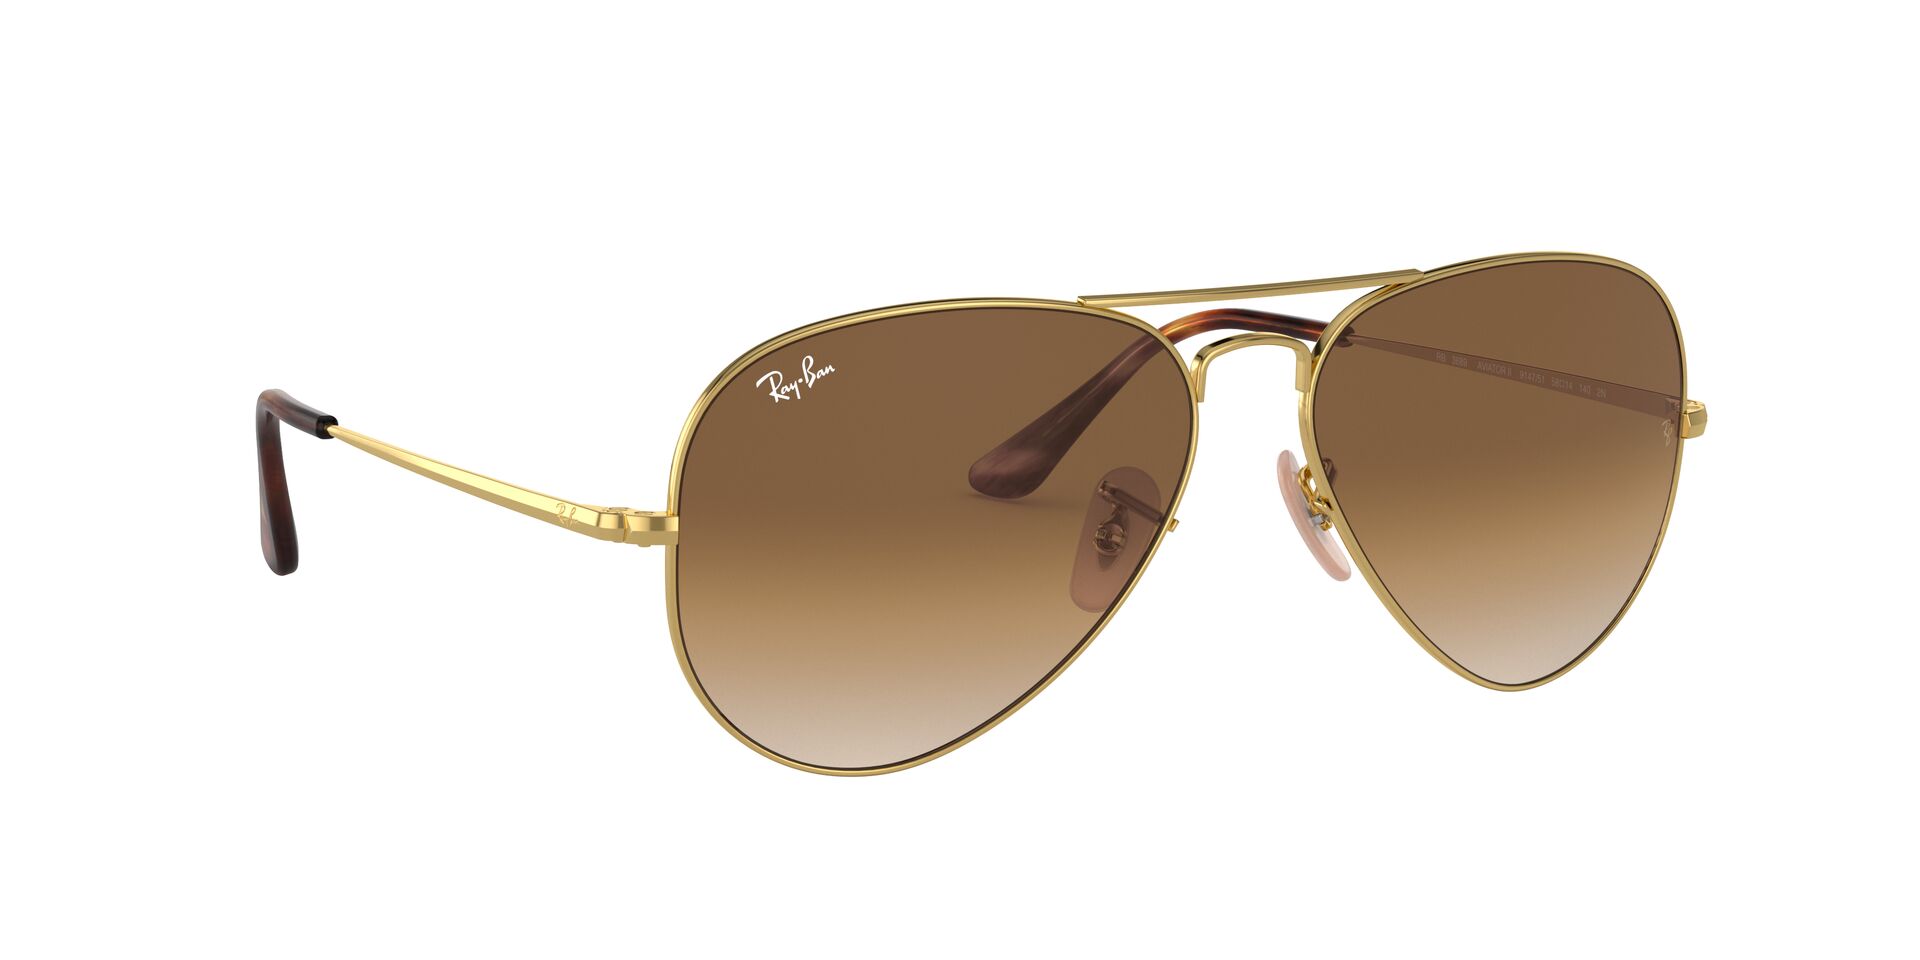 Buy Ray-Ban Rb3689 Sunglasses Online.